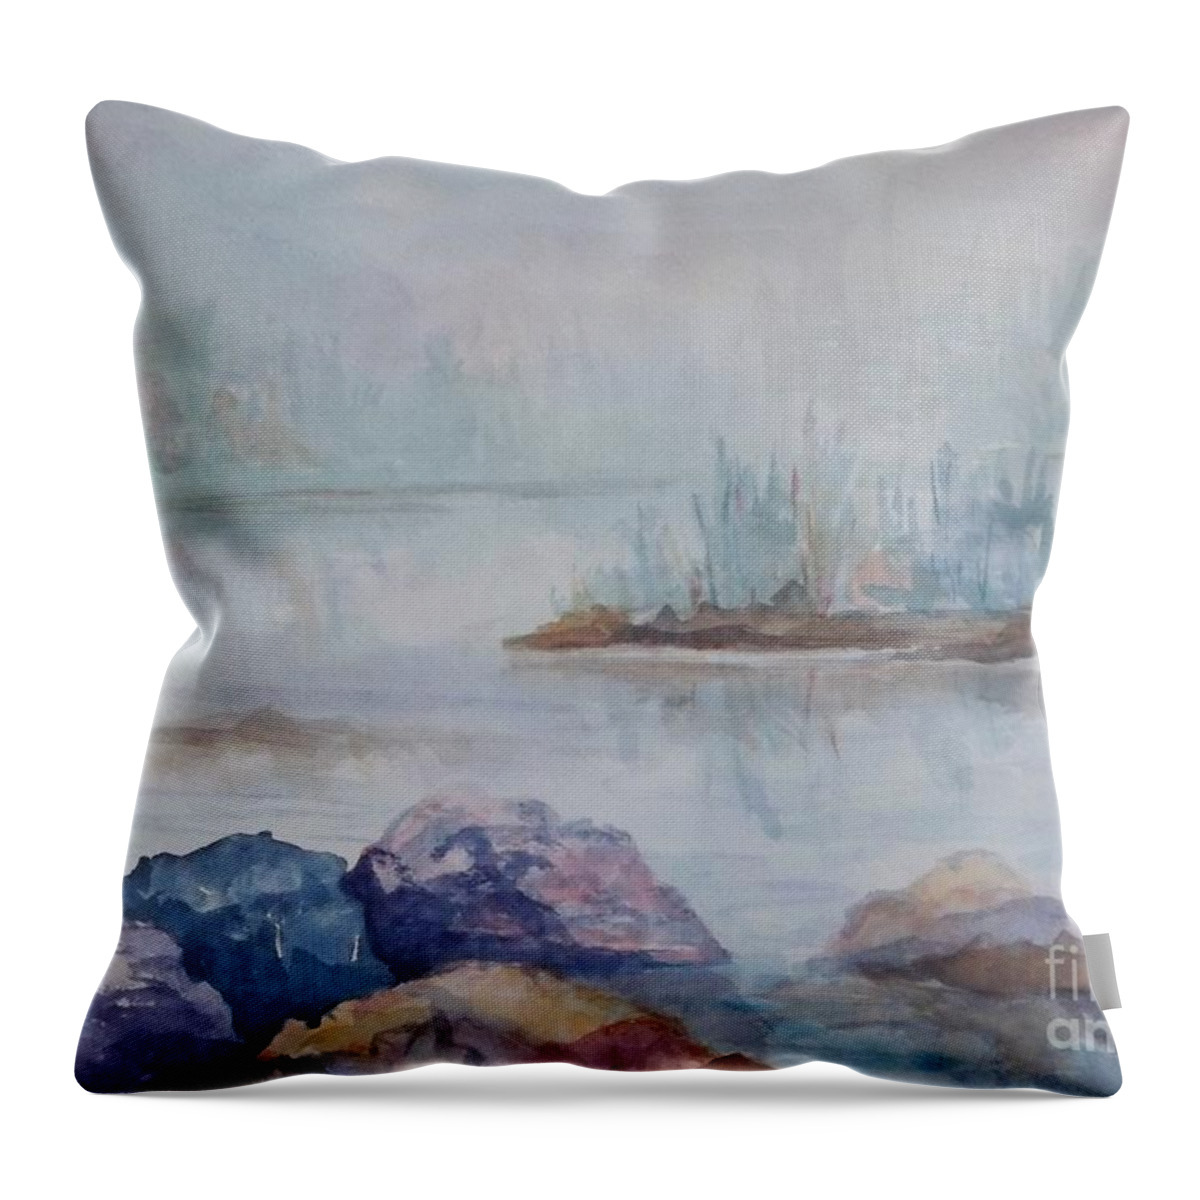 Rocks Throw Pillow featuring the painting Out of the Mist by Ellen Levinson